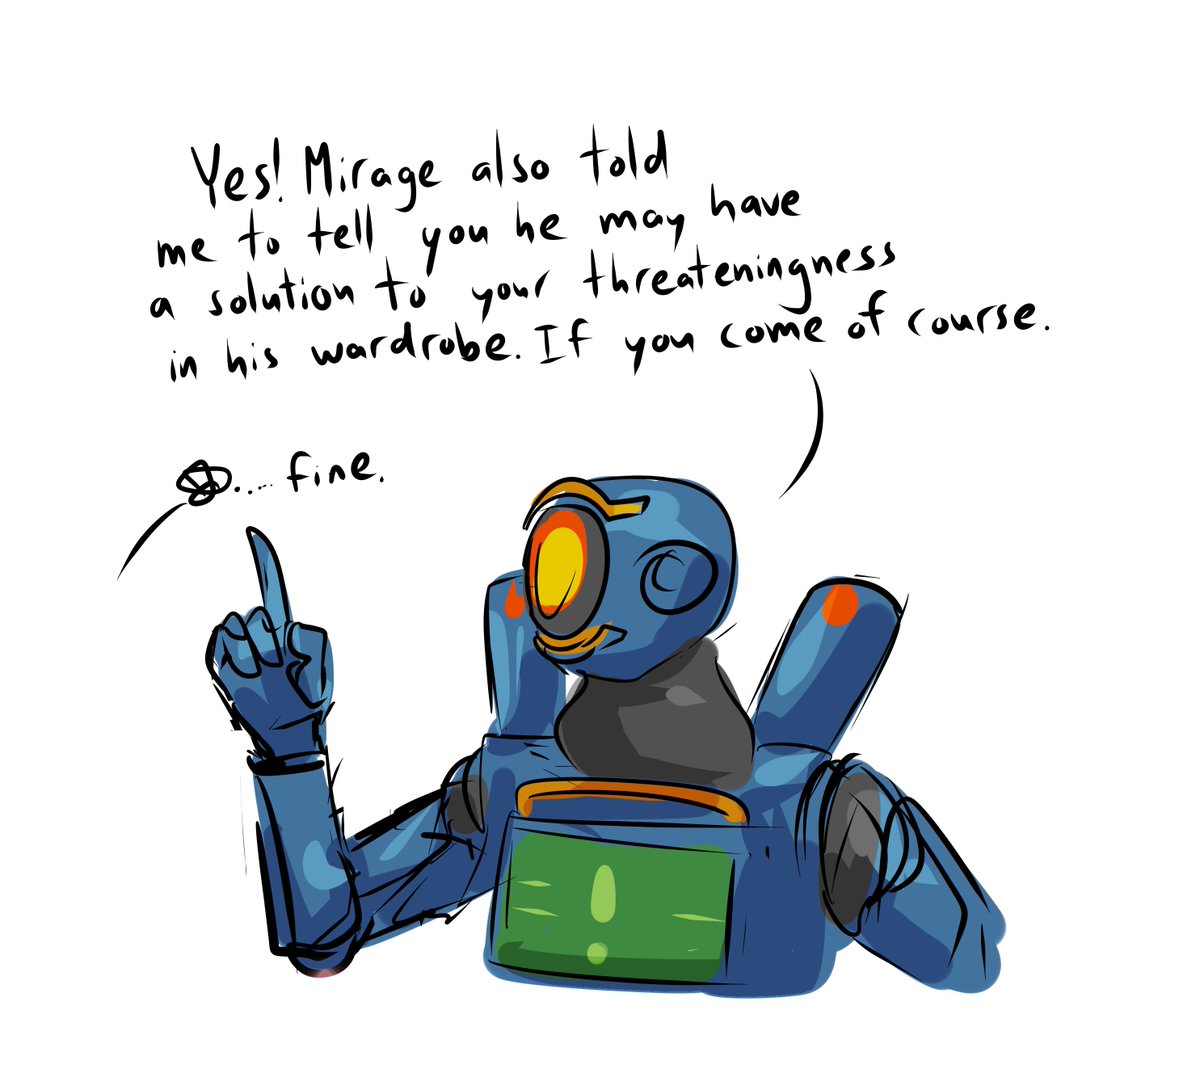 needed to get this shitty doodle out of my brain sorry #ApexLegends 